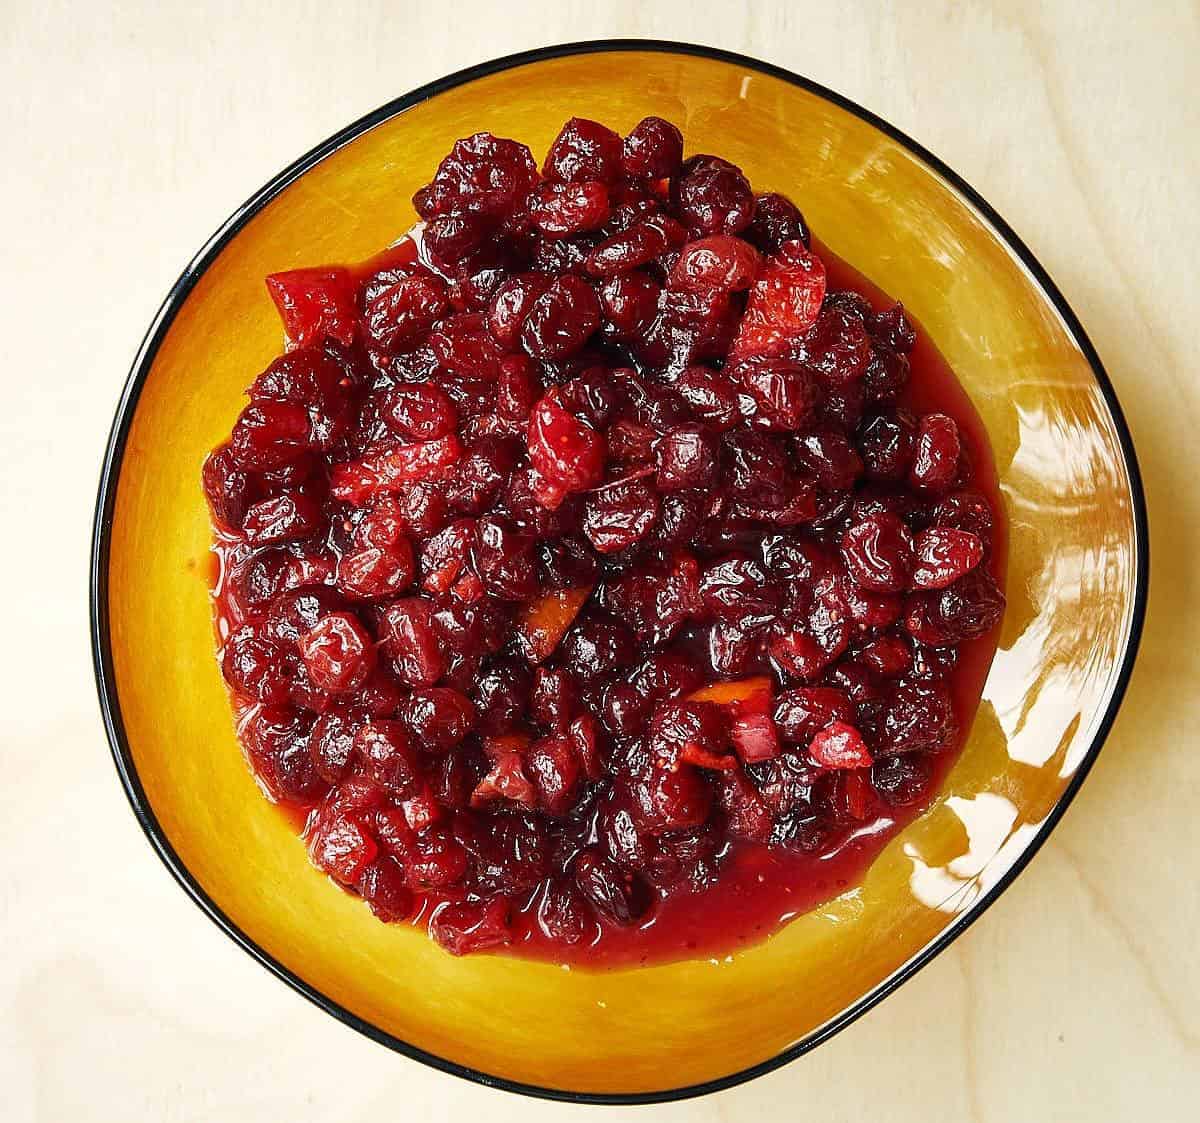  Bursting with flavor - this cranberry sauce recipe is a game-changer!